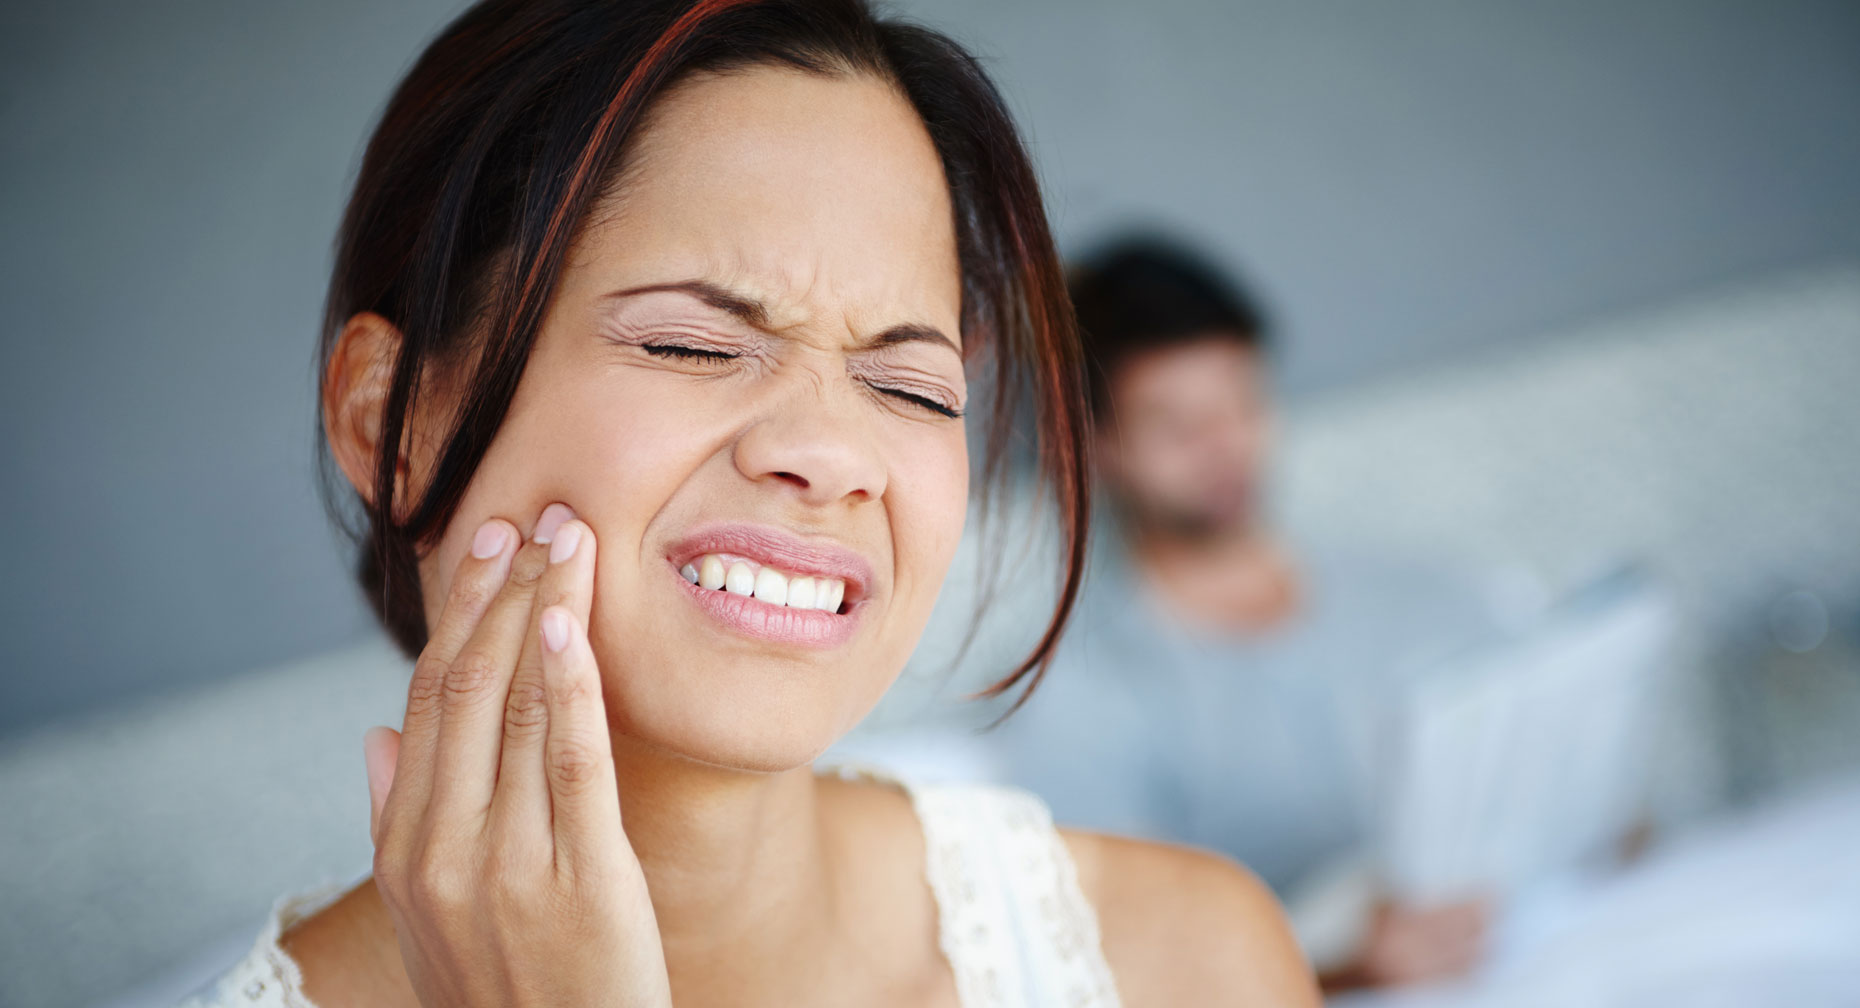 Remedies for Wisdom Tooth Pain